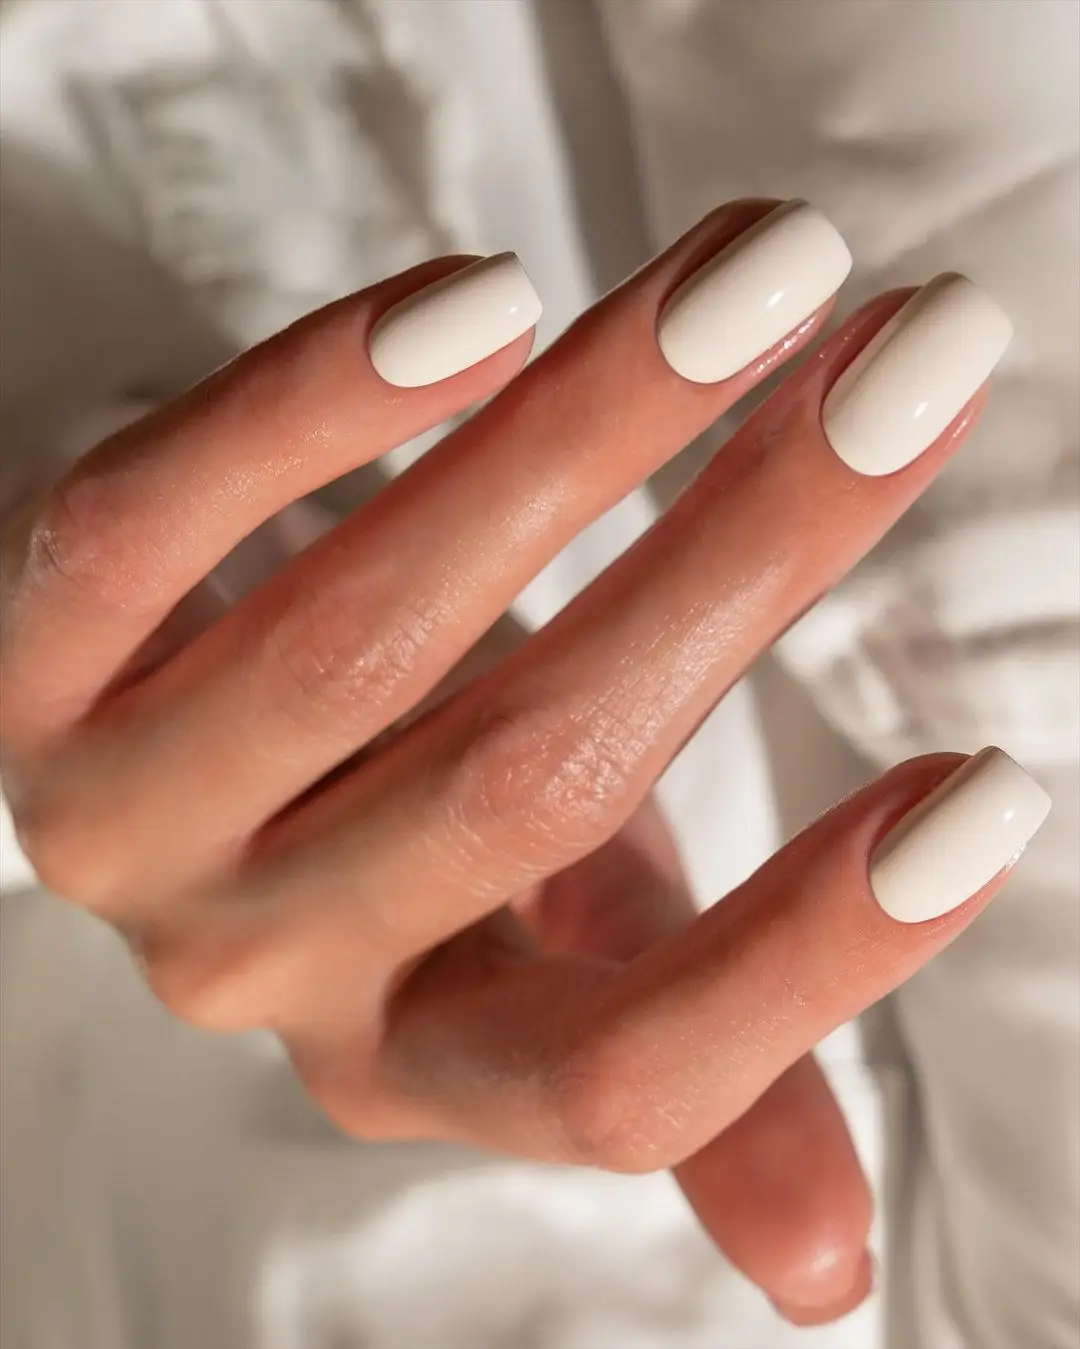 Look Pretty in Pale Polish with This Easter Nail Art ...